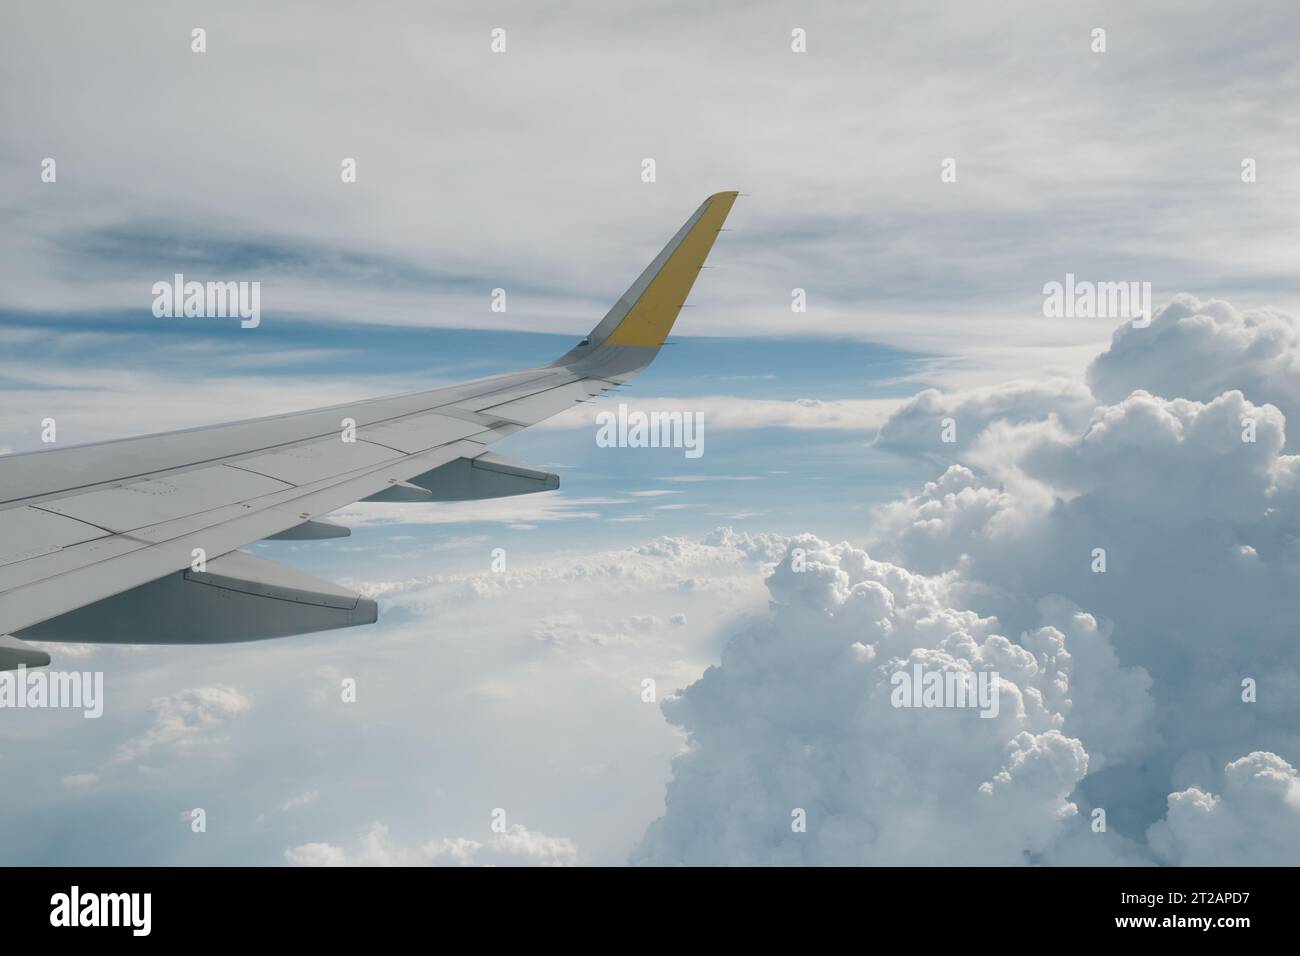 View of right wing from window of airplane flying up in the air. Clouds in blue sky. Plane in flight. Aviation business. Airline travel background. Stock Photo